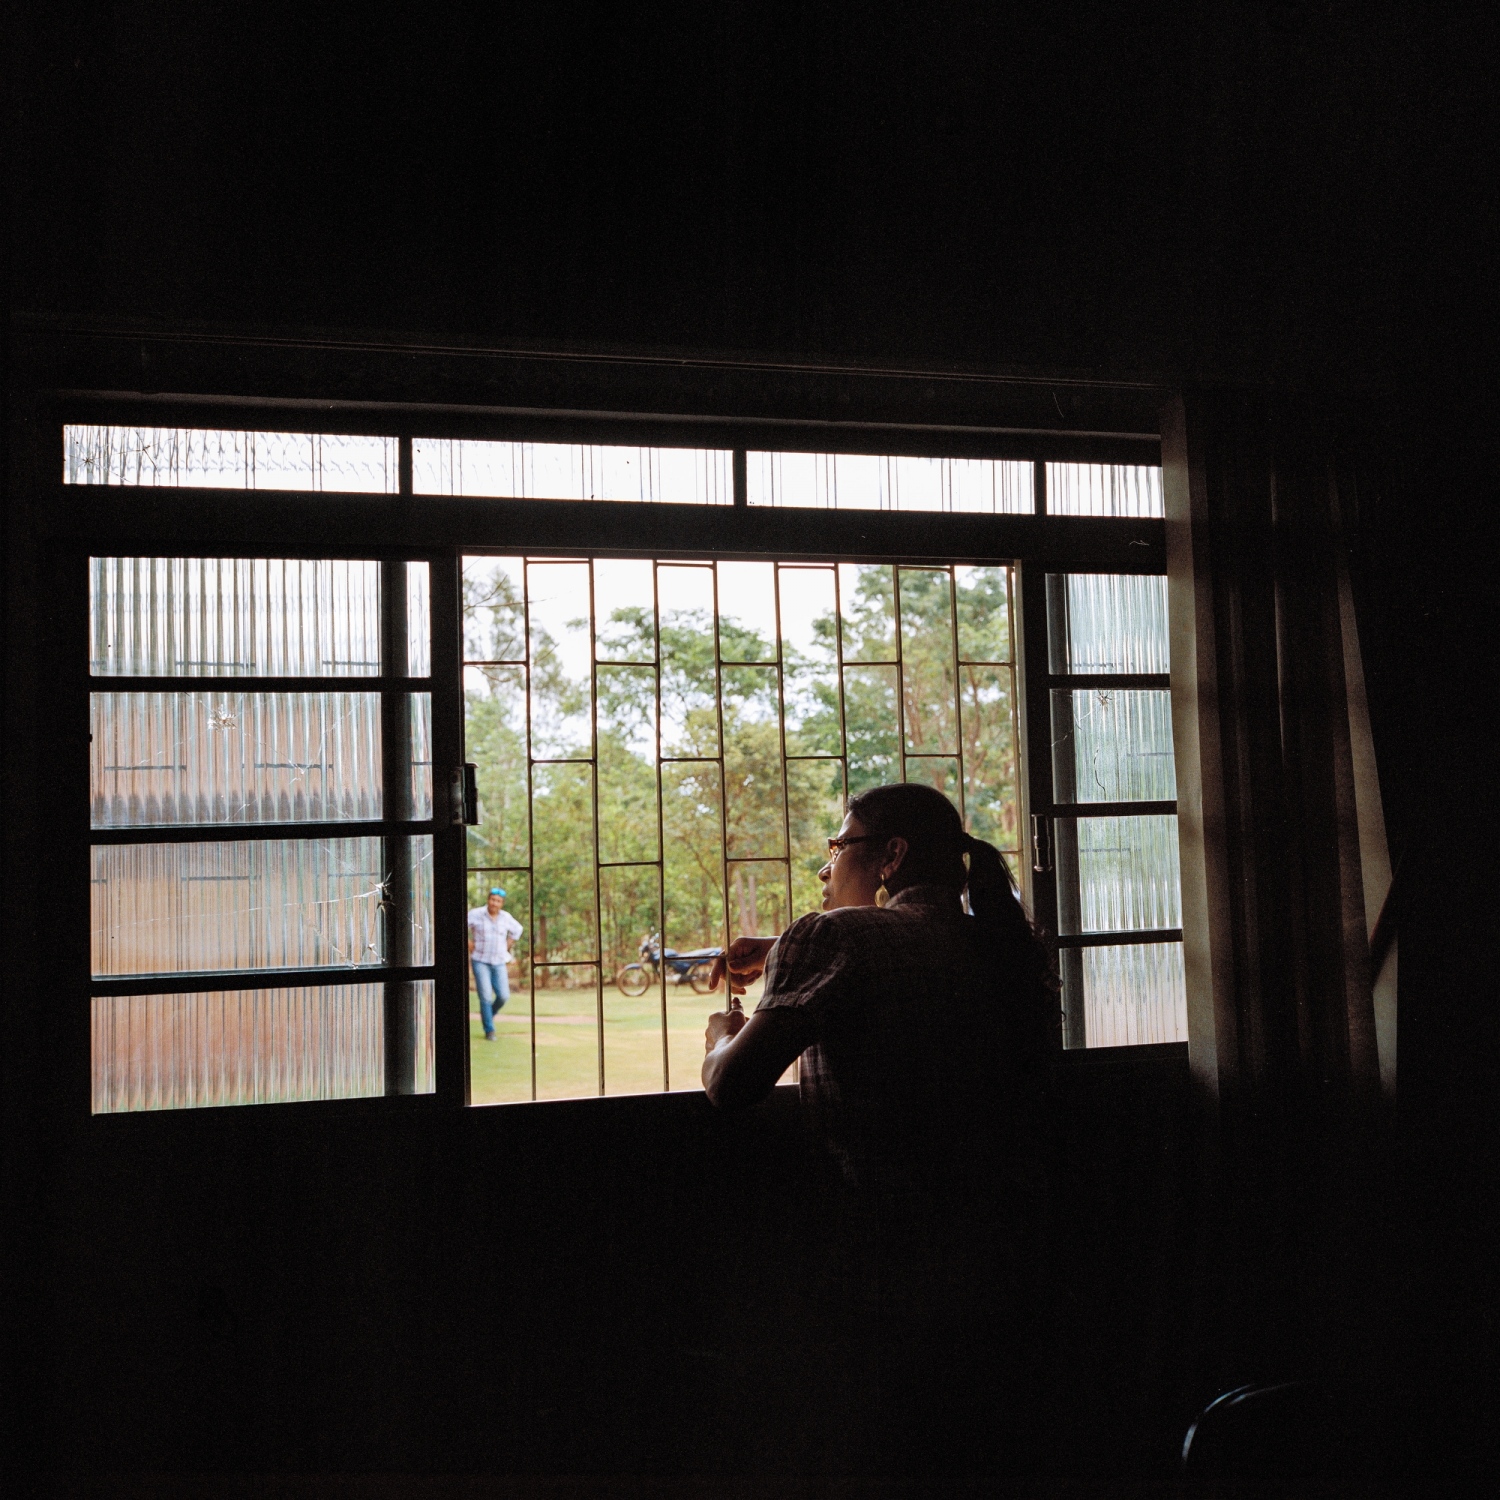 November 28, 2016. Local psychologist Elizeti Moreira looks out the window of health center in the Dourados Guarani-Kai&oacute;wa Reservation in Matto Grosso Du Sul, Brazil. Oliveira committed suicide the previous week and had come to see her for help beforehand, he had spoken about his inability to get work and support his four children, although he had never mentioned thoughts of suicide. He was 39 years old.